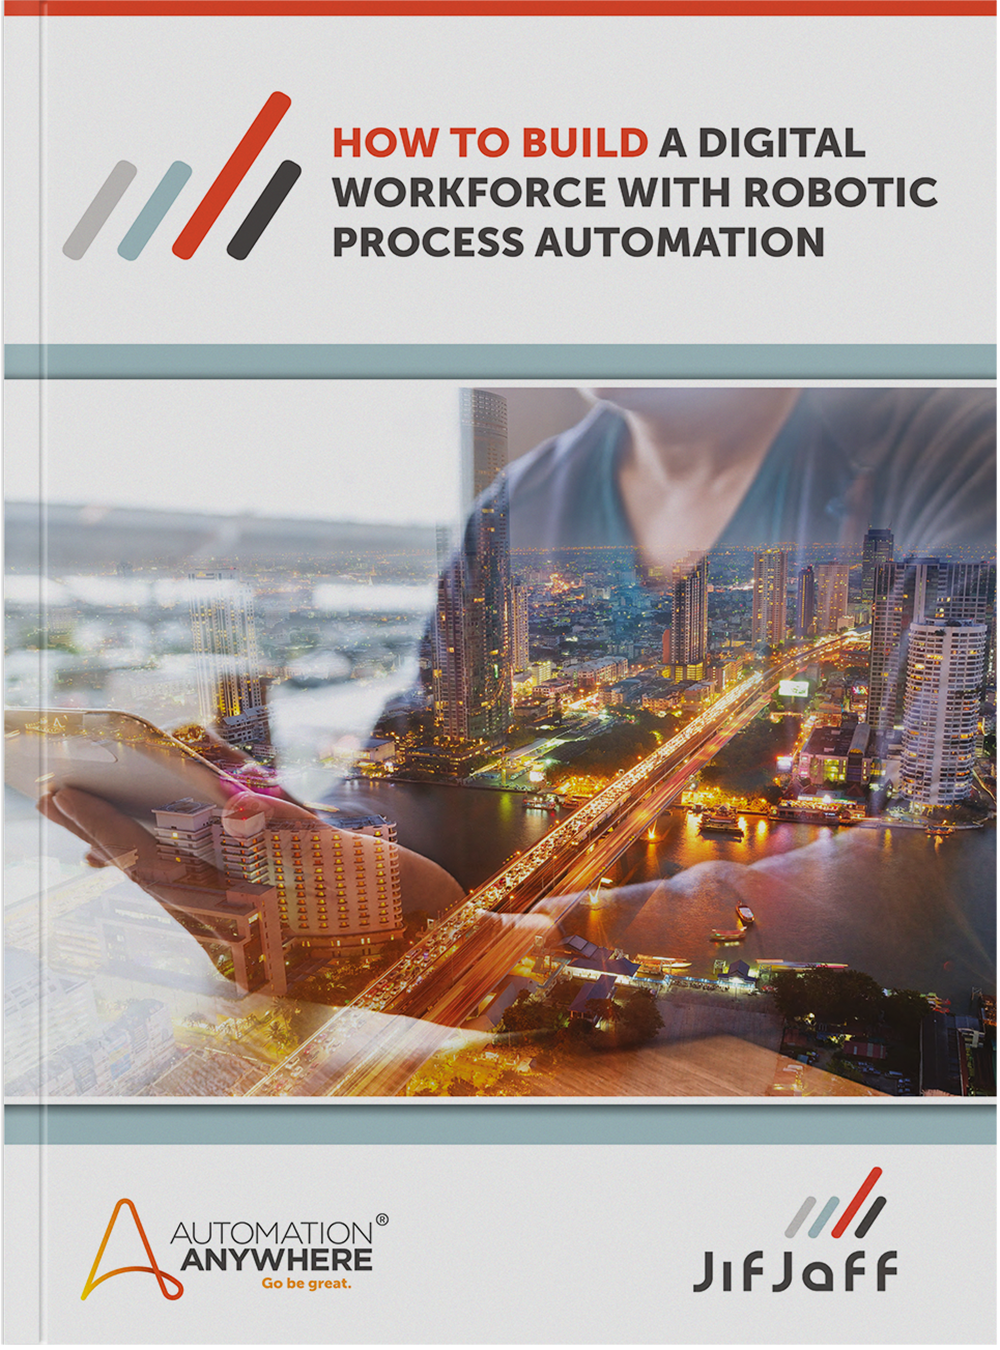 How to build a digital workforce automation report